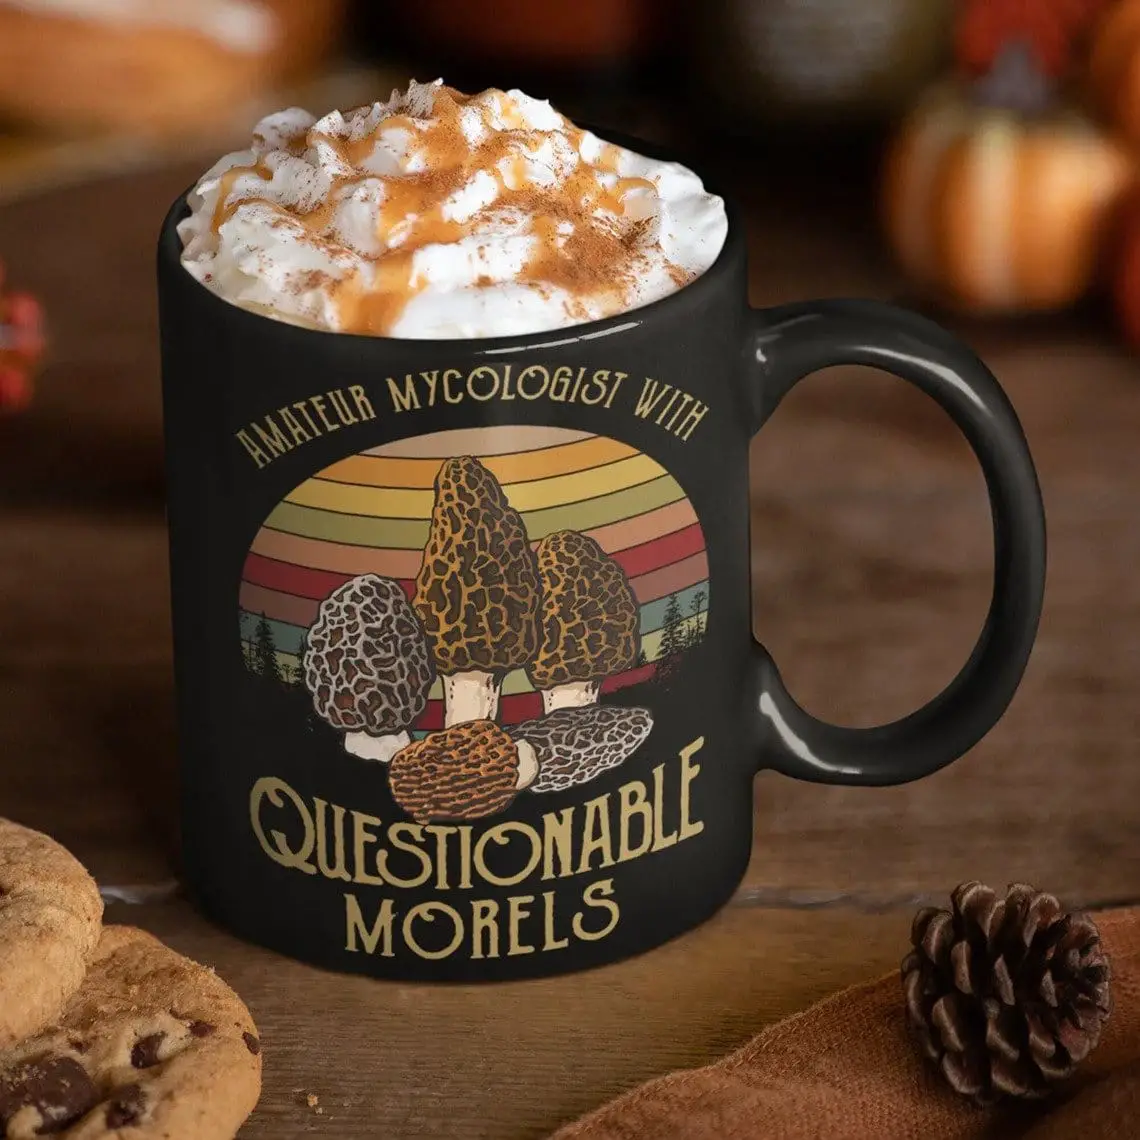 Amateur Mycologist With Questionable Morels Coffee Mug with whipped cream, caramel, and cookies